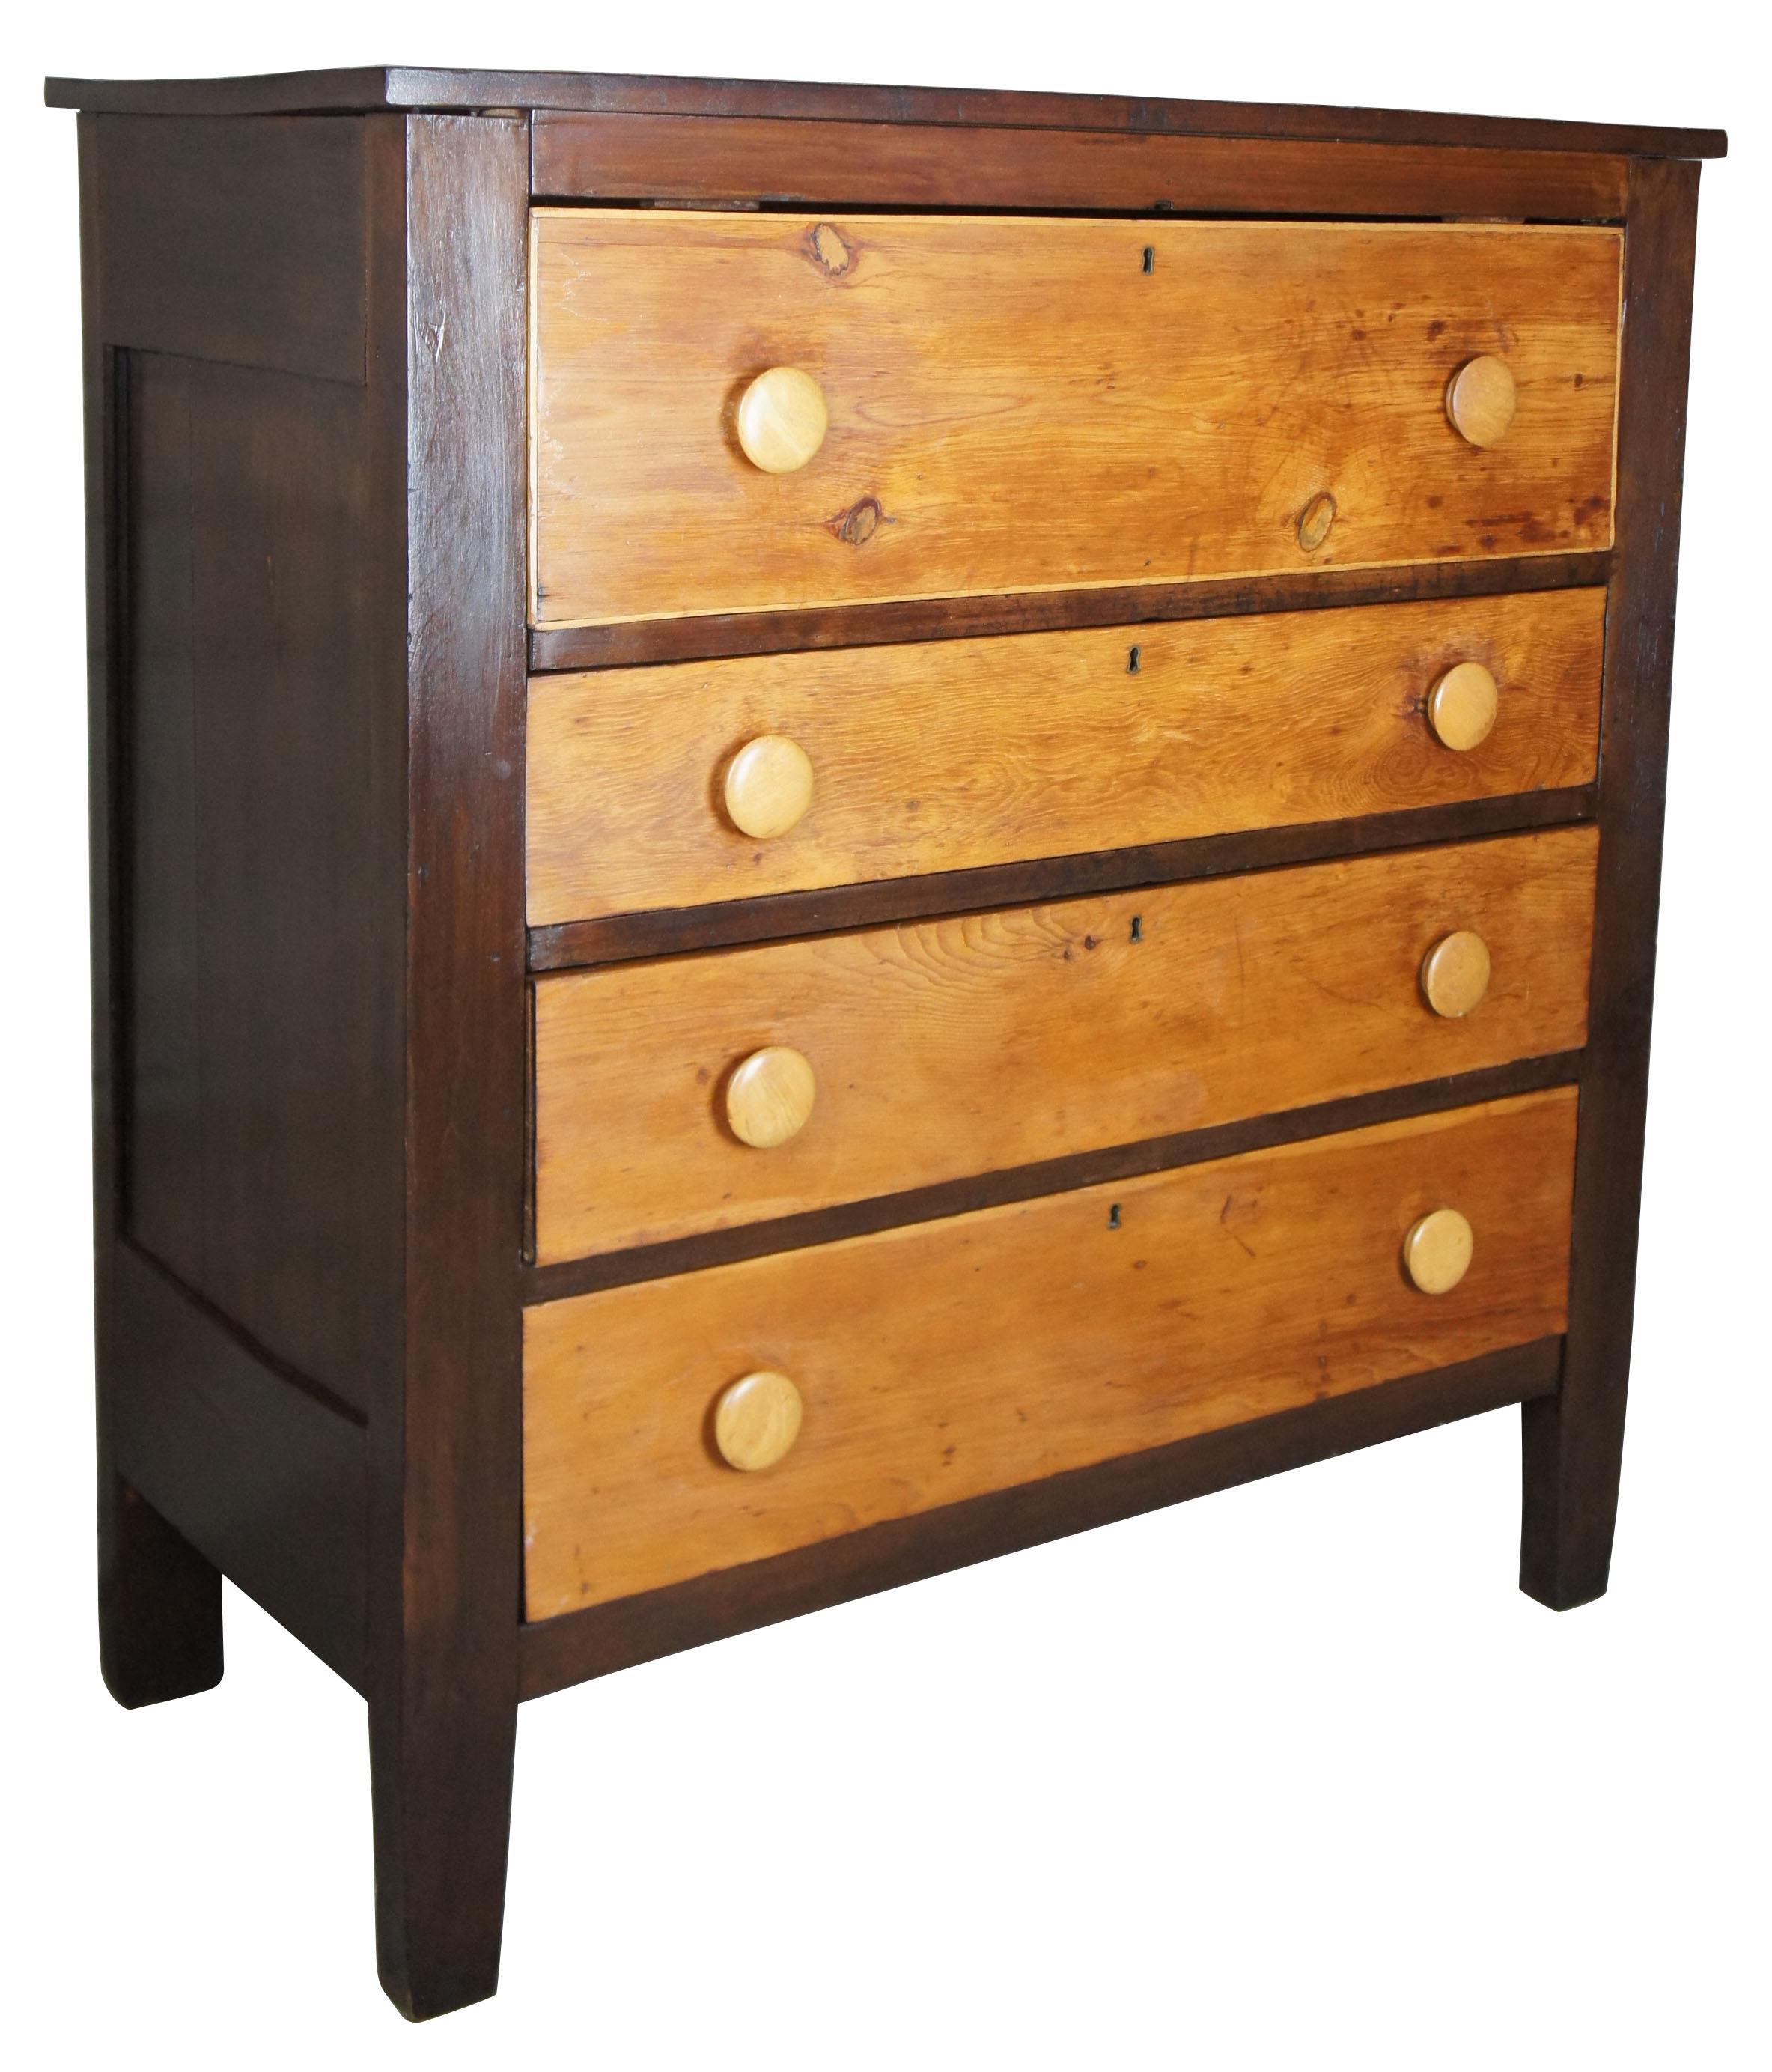 Early American antique pine 4-drawer tallboy chest rustic primitive dresser, 

circa 1850s pine chest of drawers.